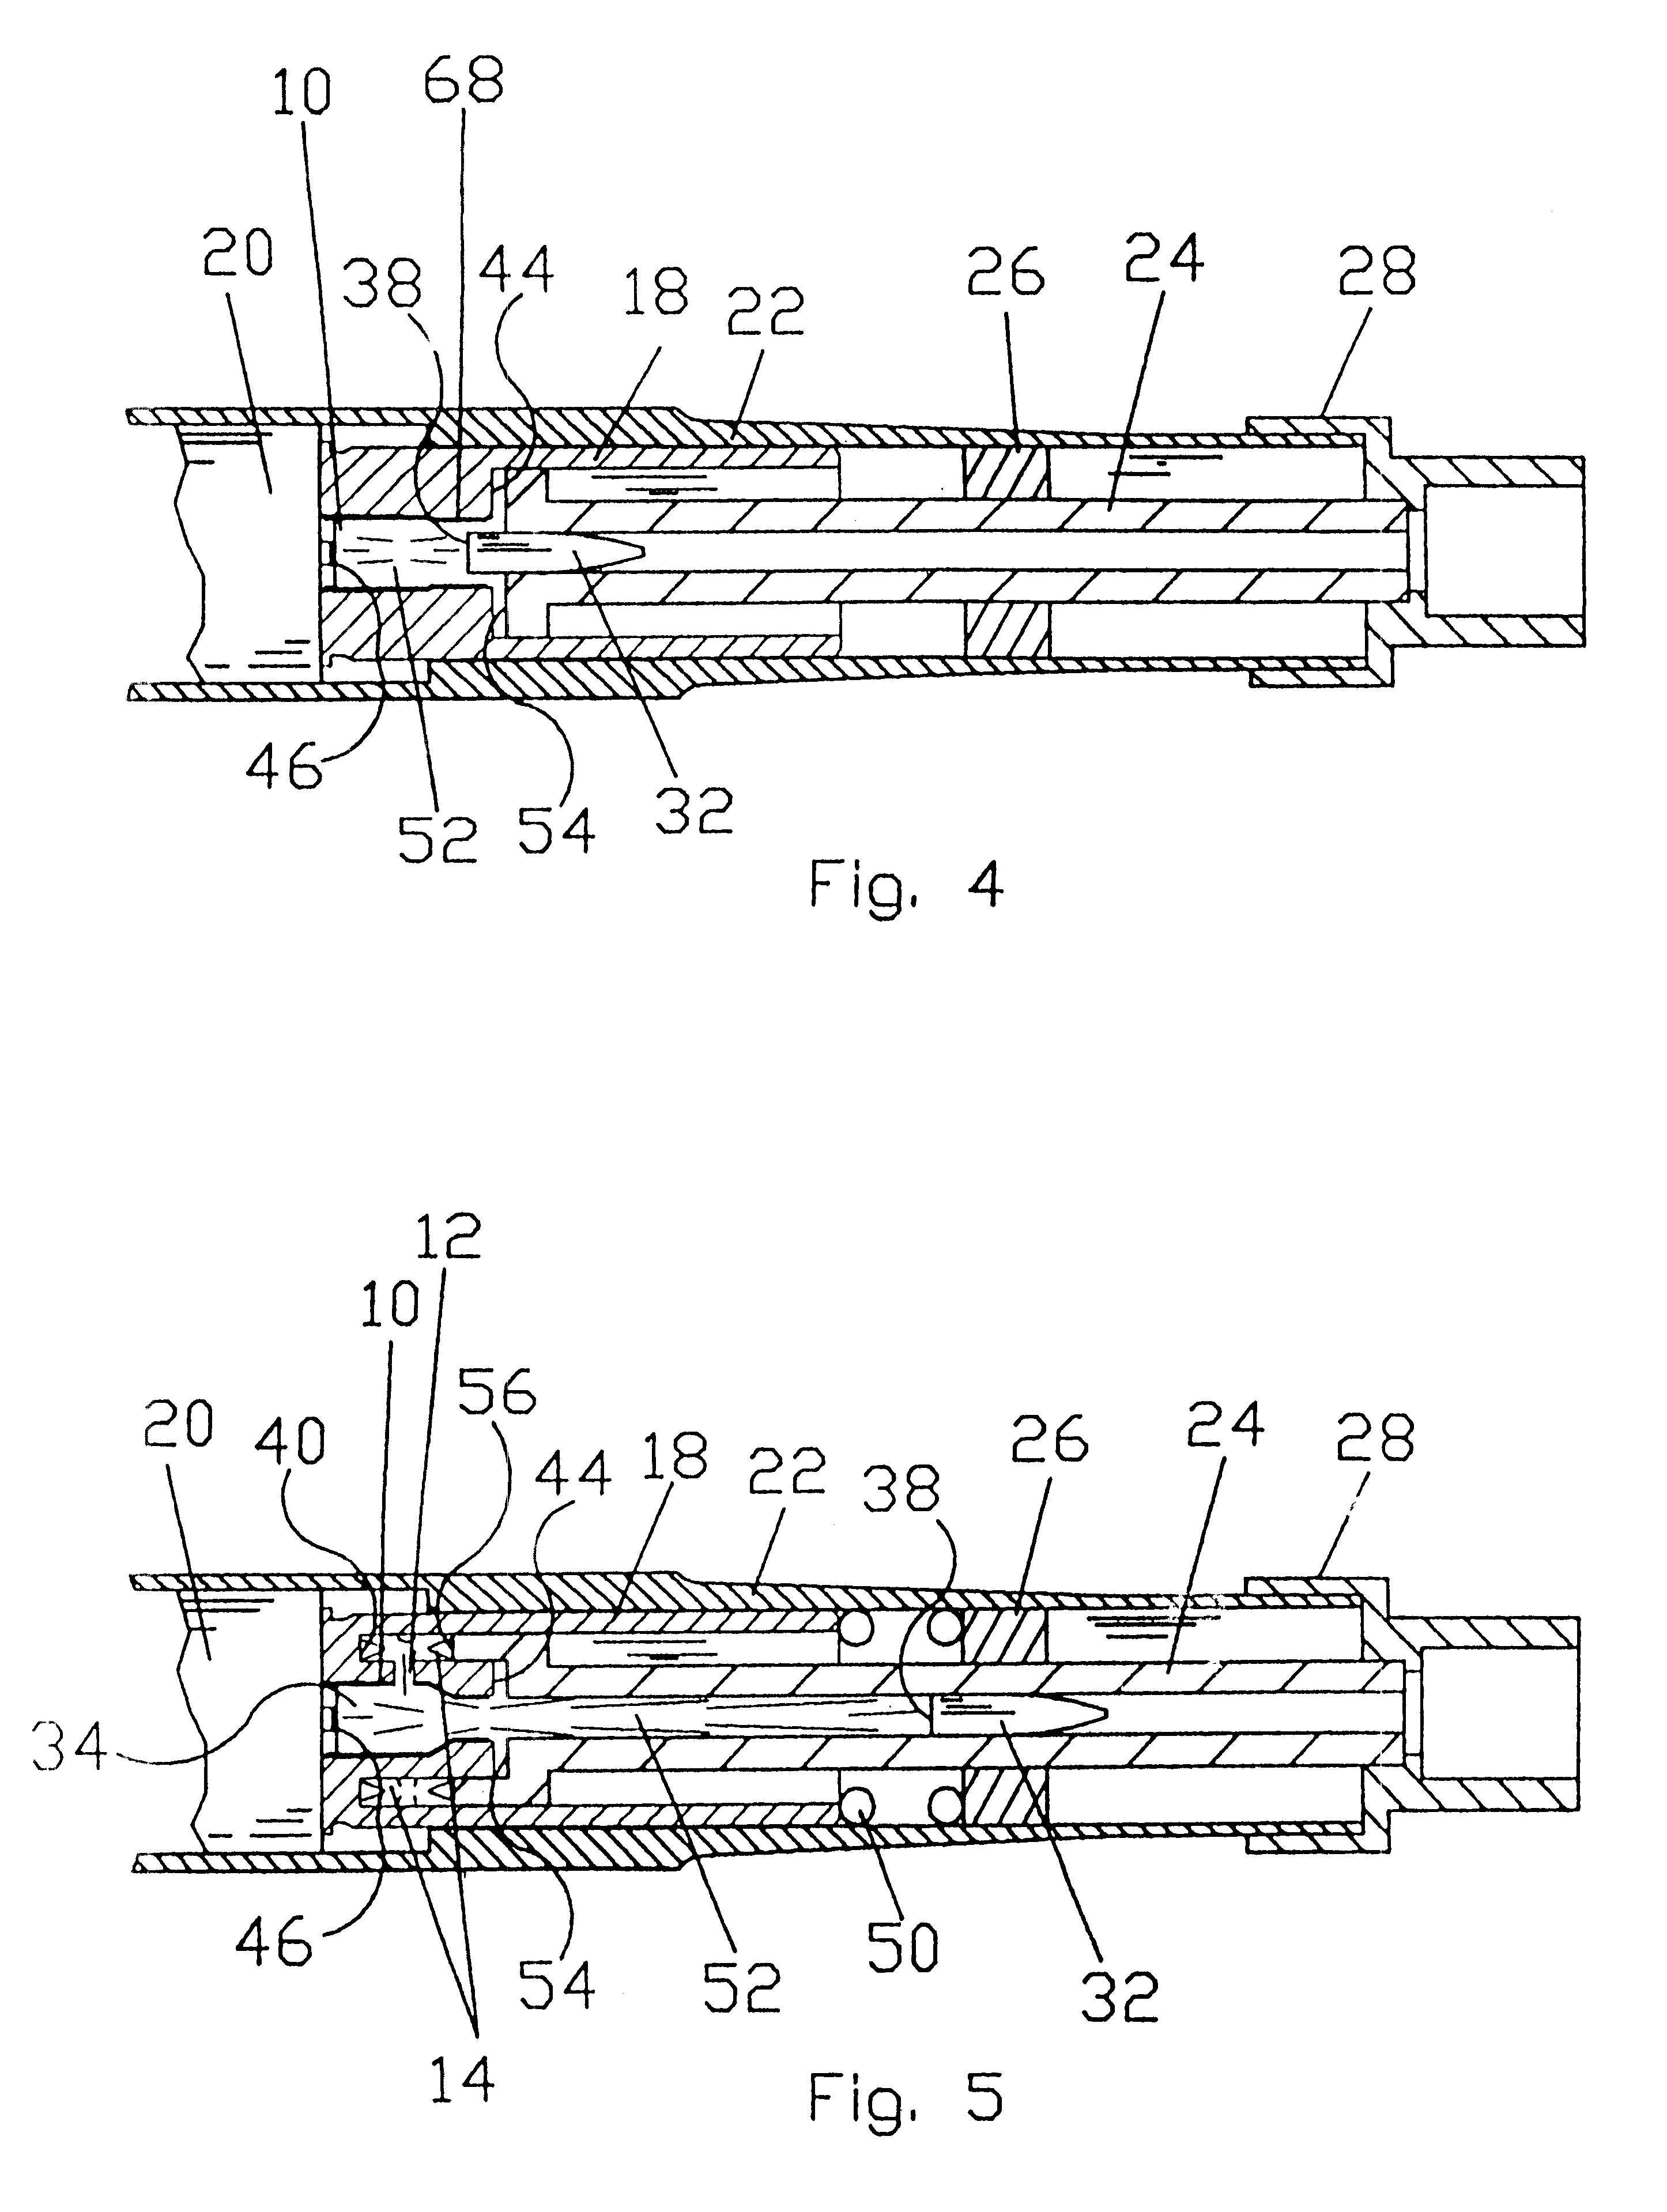 Subcaliber device/blank firing adaptor for blowback operated or recoil operated weapons